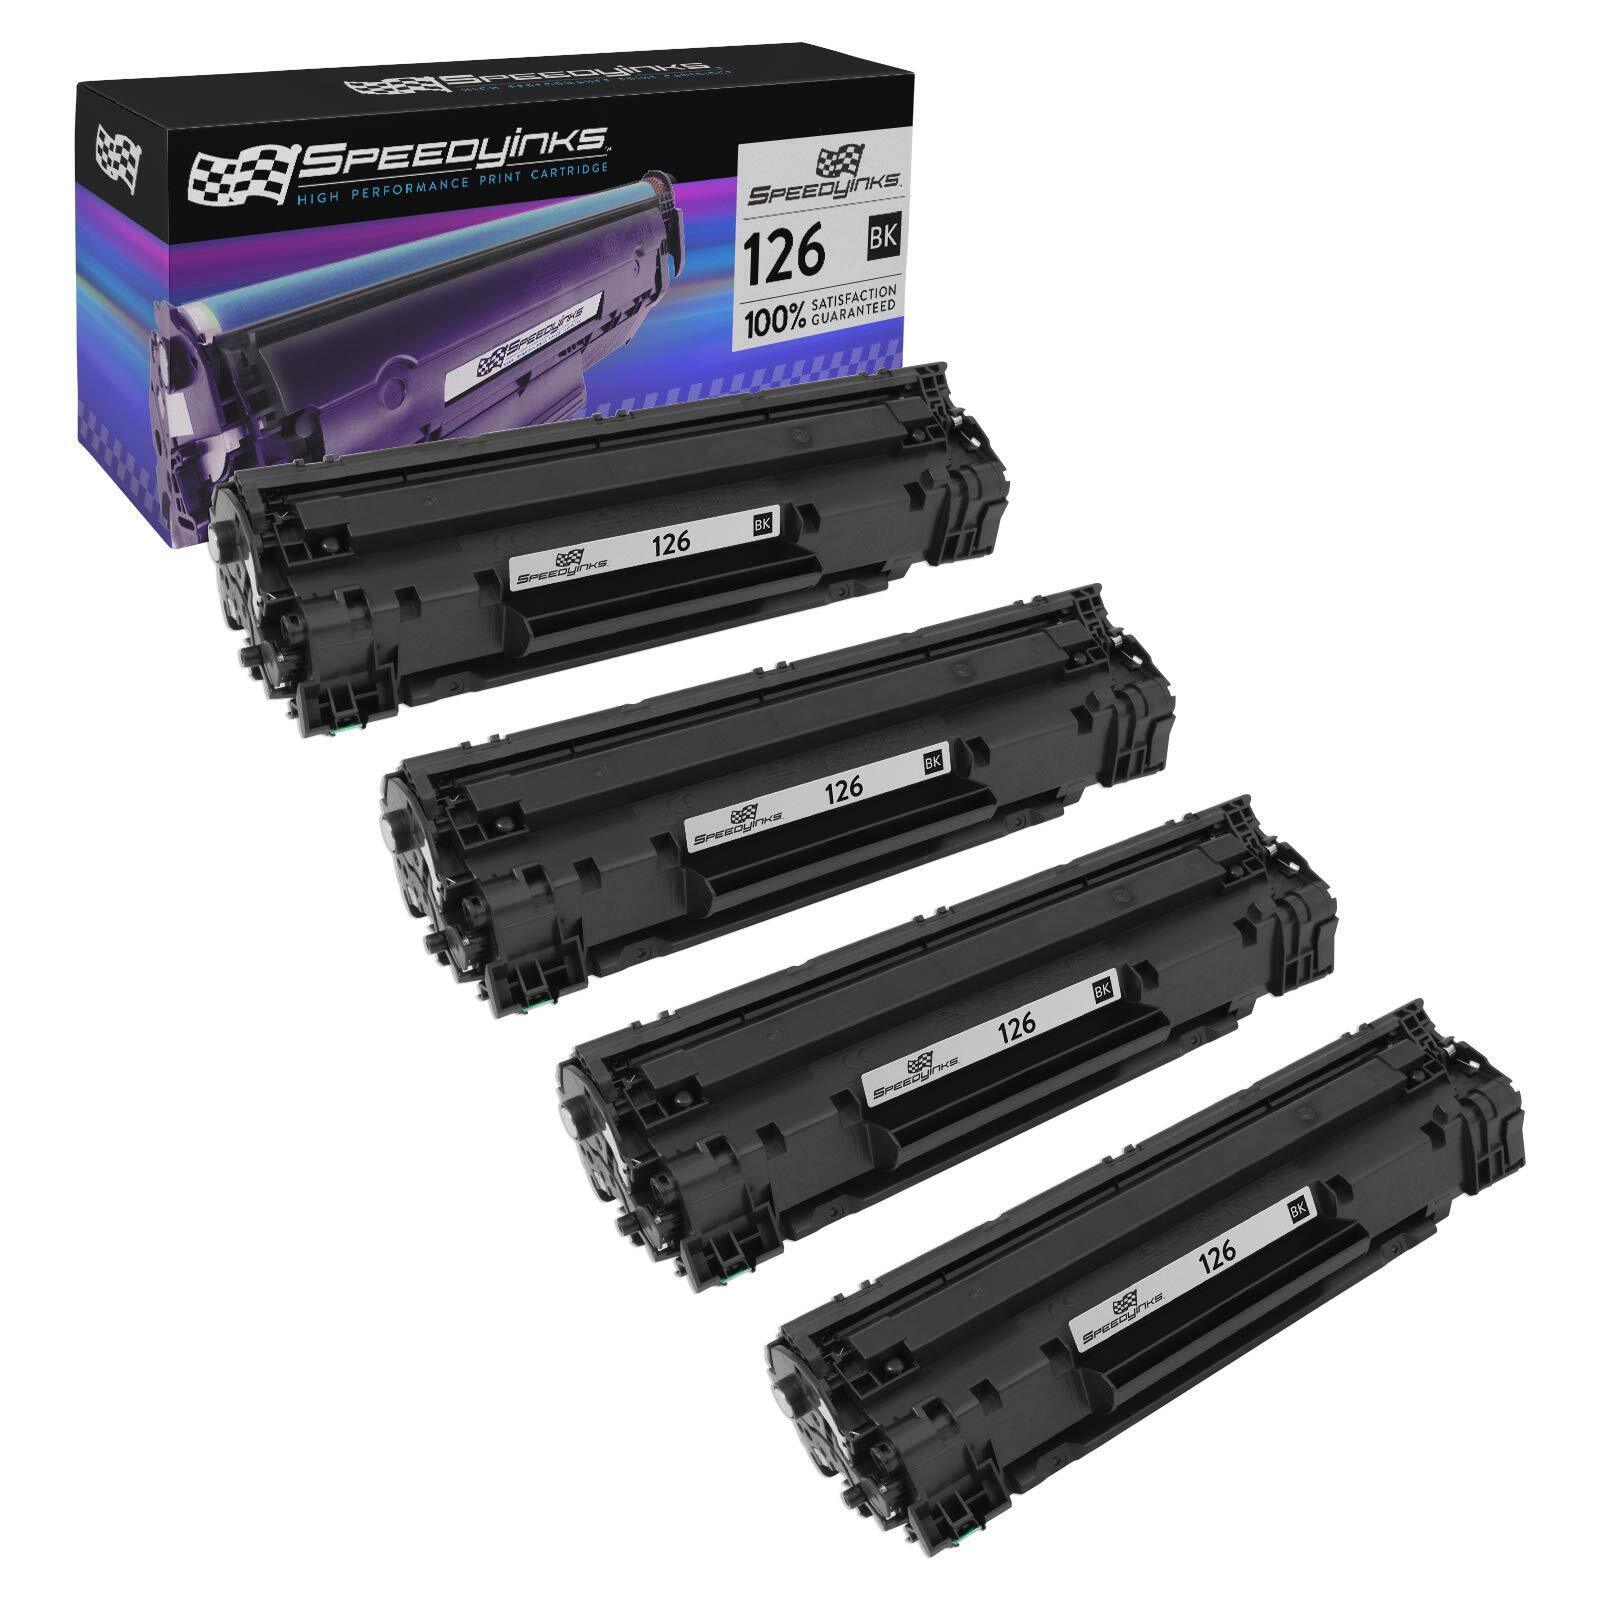 SPEEDYINKS Compatible Toner Cartridge for Canon 126 (Black, 4-Pack)